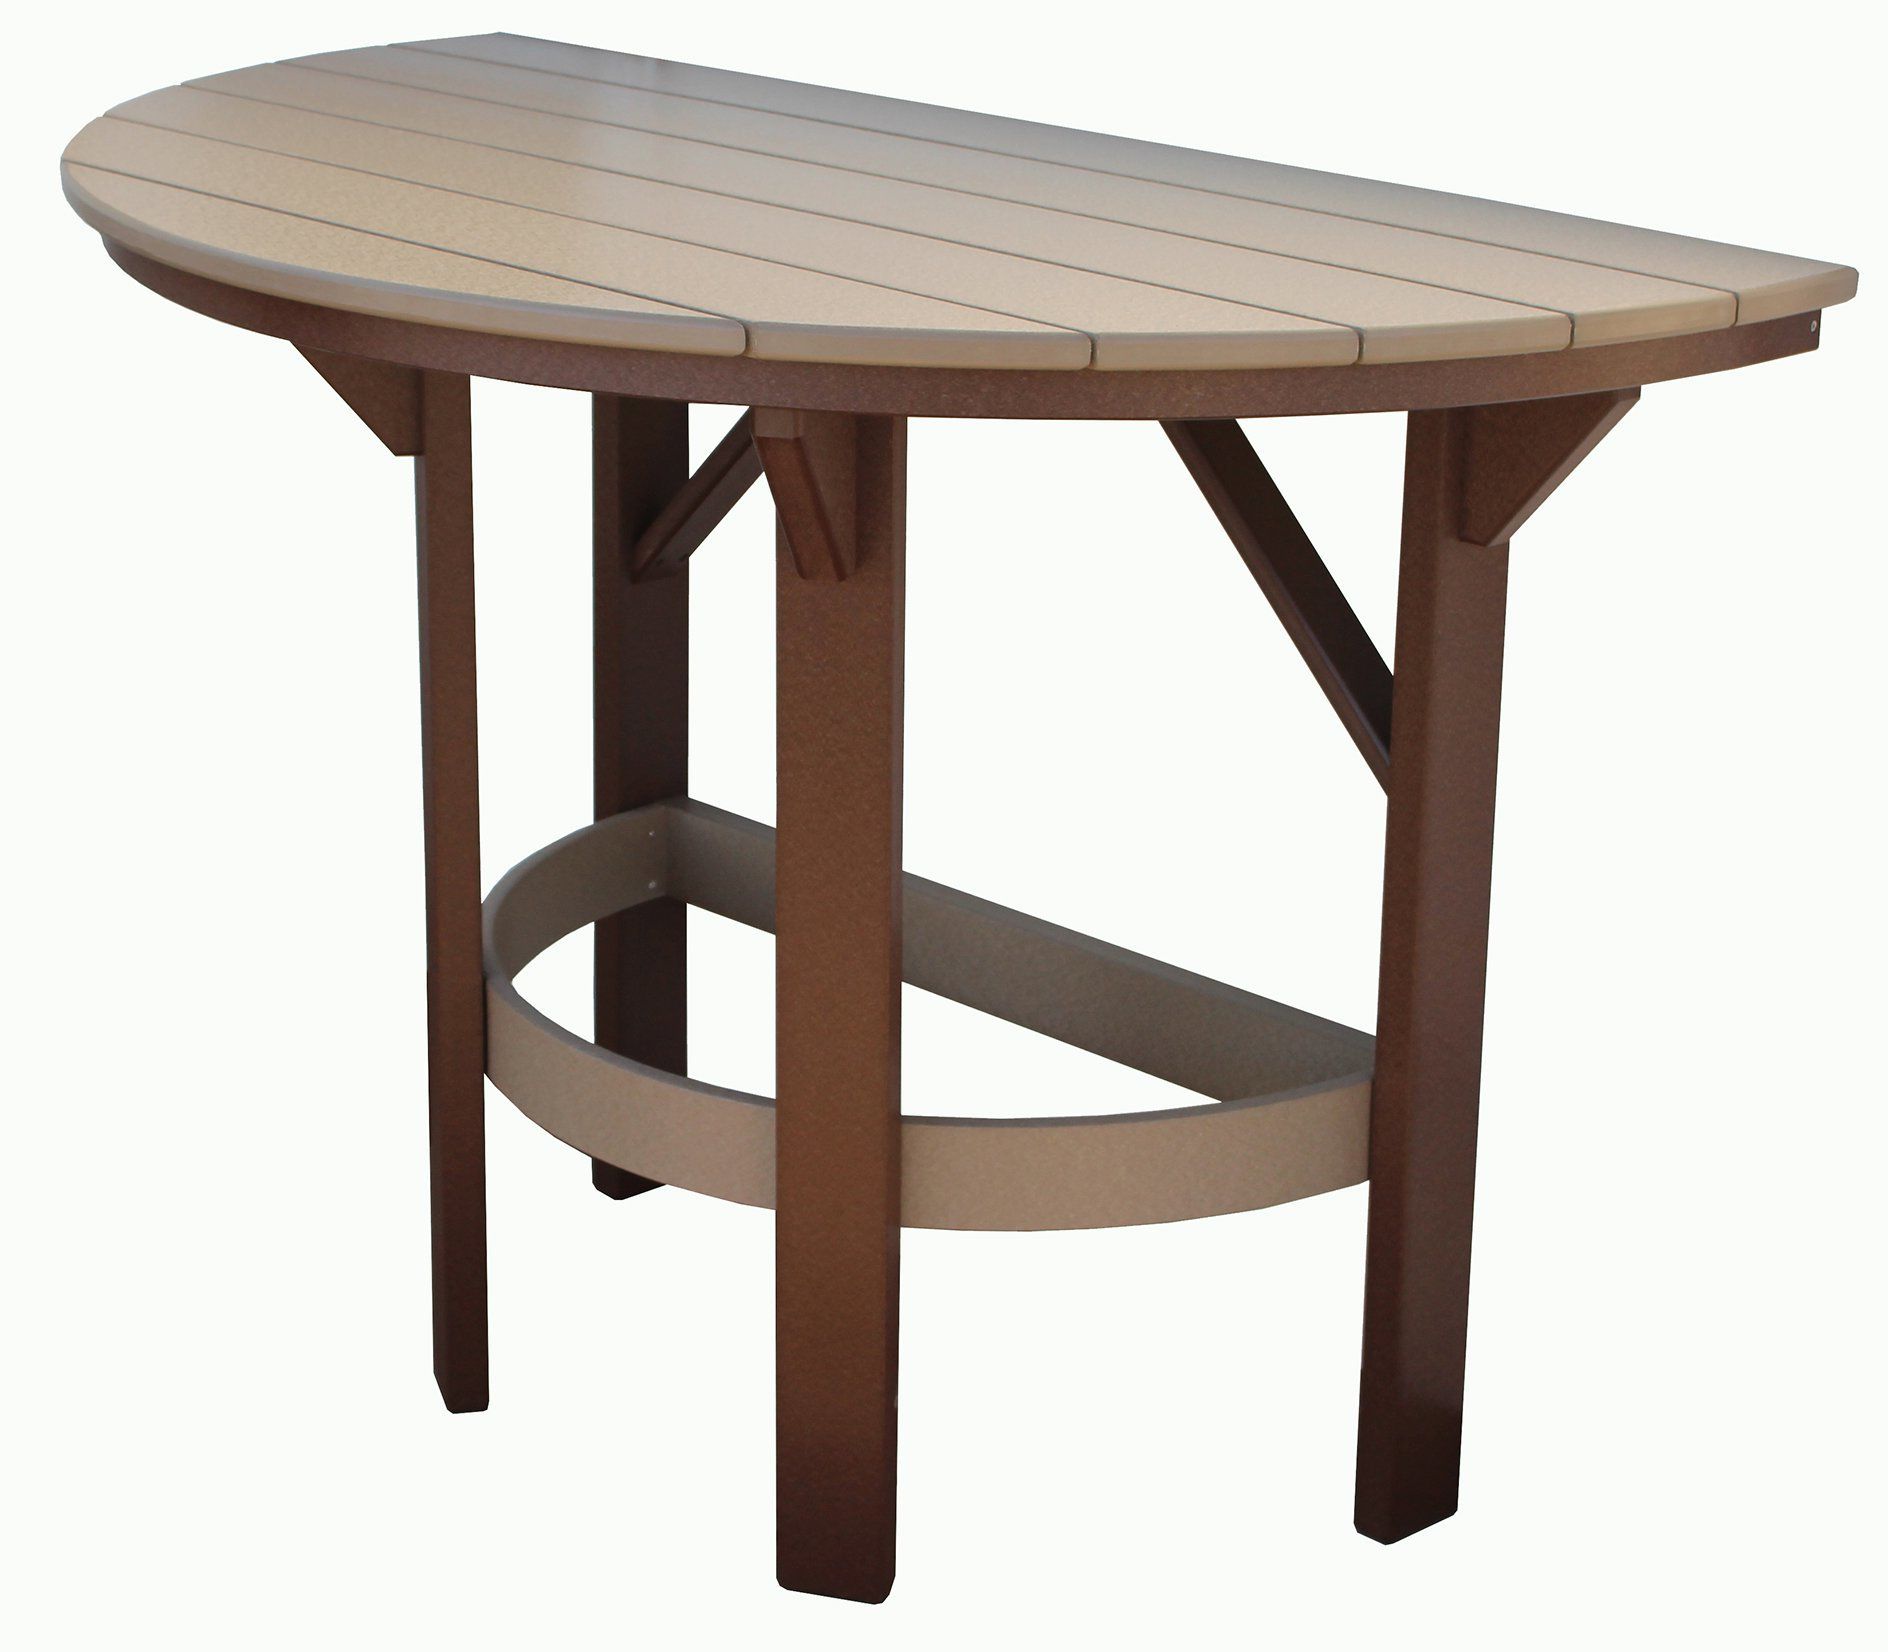 Seaside 60" Half Round Poly Dining Table From Dutchcrafters Amish Intended For Famous Outdoor Half Round Coffee Tables (View 10 of 10)